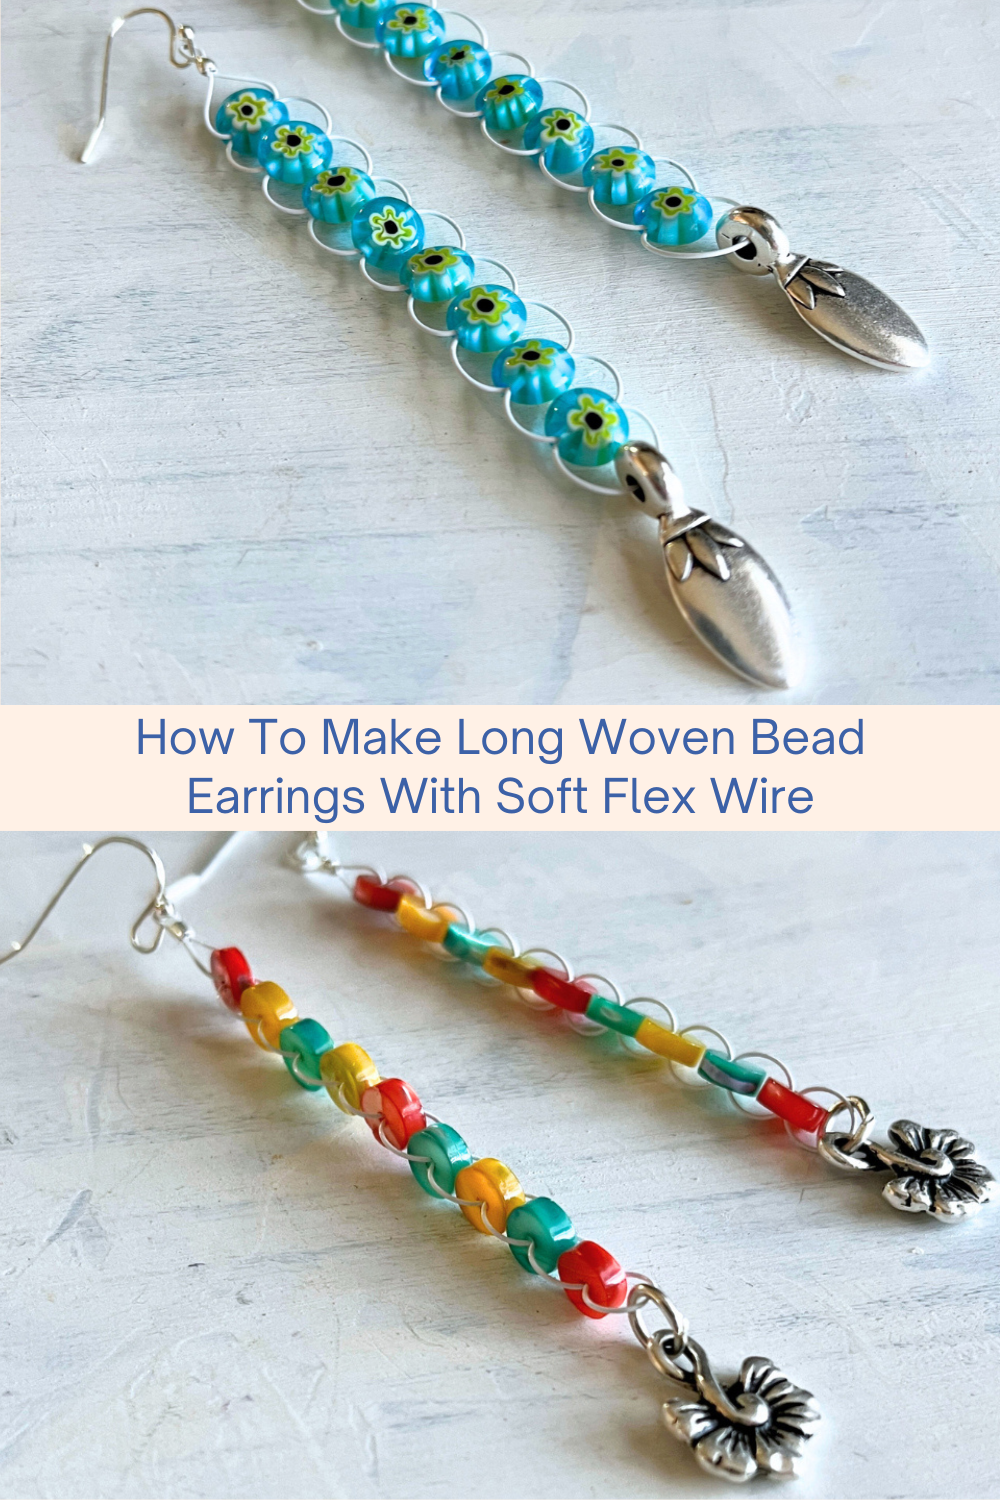 How To Make Long Woven Bead Earrings With Soft Flex Wire Collage